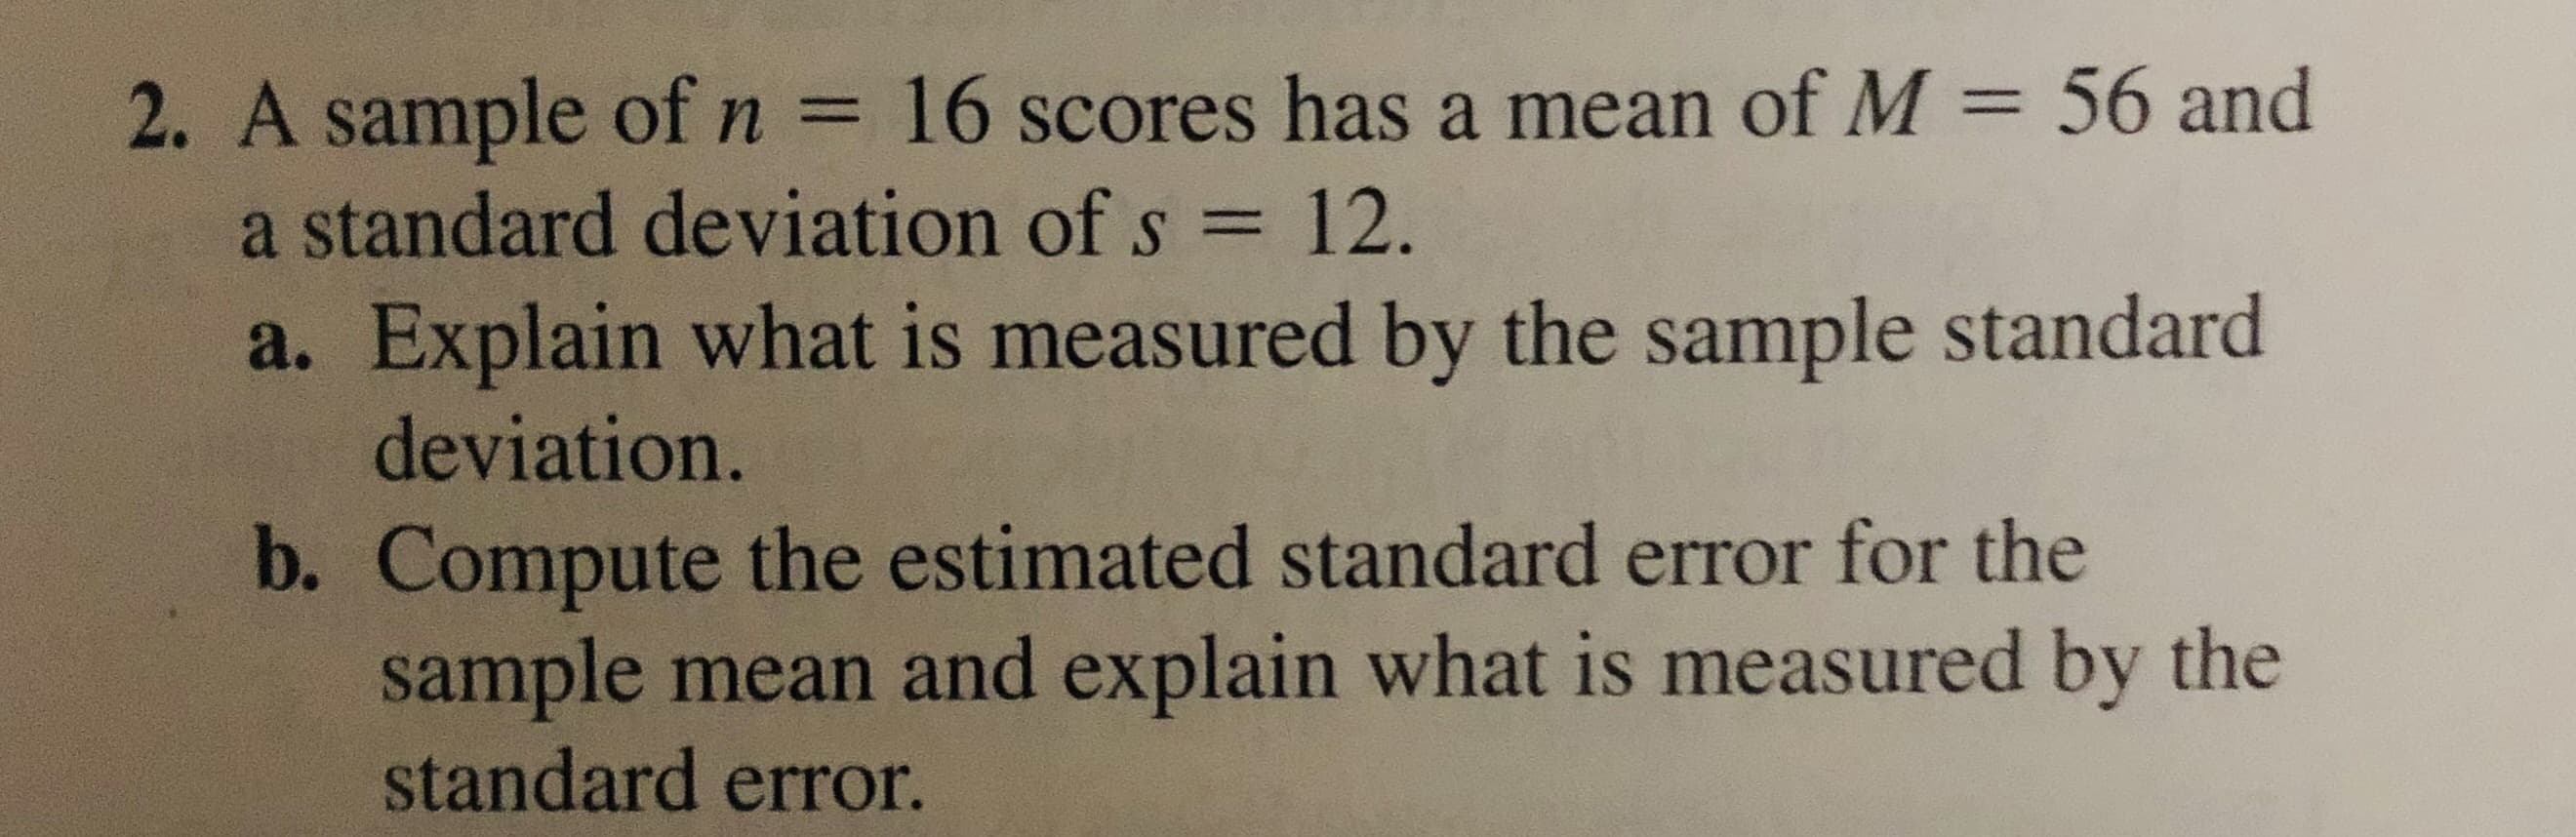 2. A sample of n = 16 scores has a mean of M = 56 and
a standard deviation of s = 12.
%3D
%3D
%3D
a. Explain what is measured by the sample standard
deviation.
b. Compute the estimated standard error for the
sample mean and explain what is measured by the
standard error.
